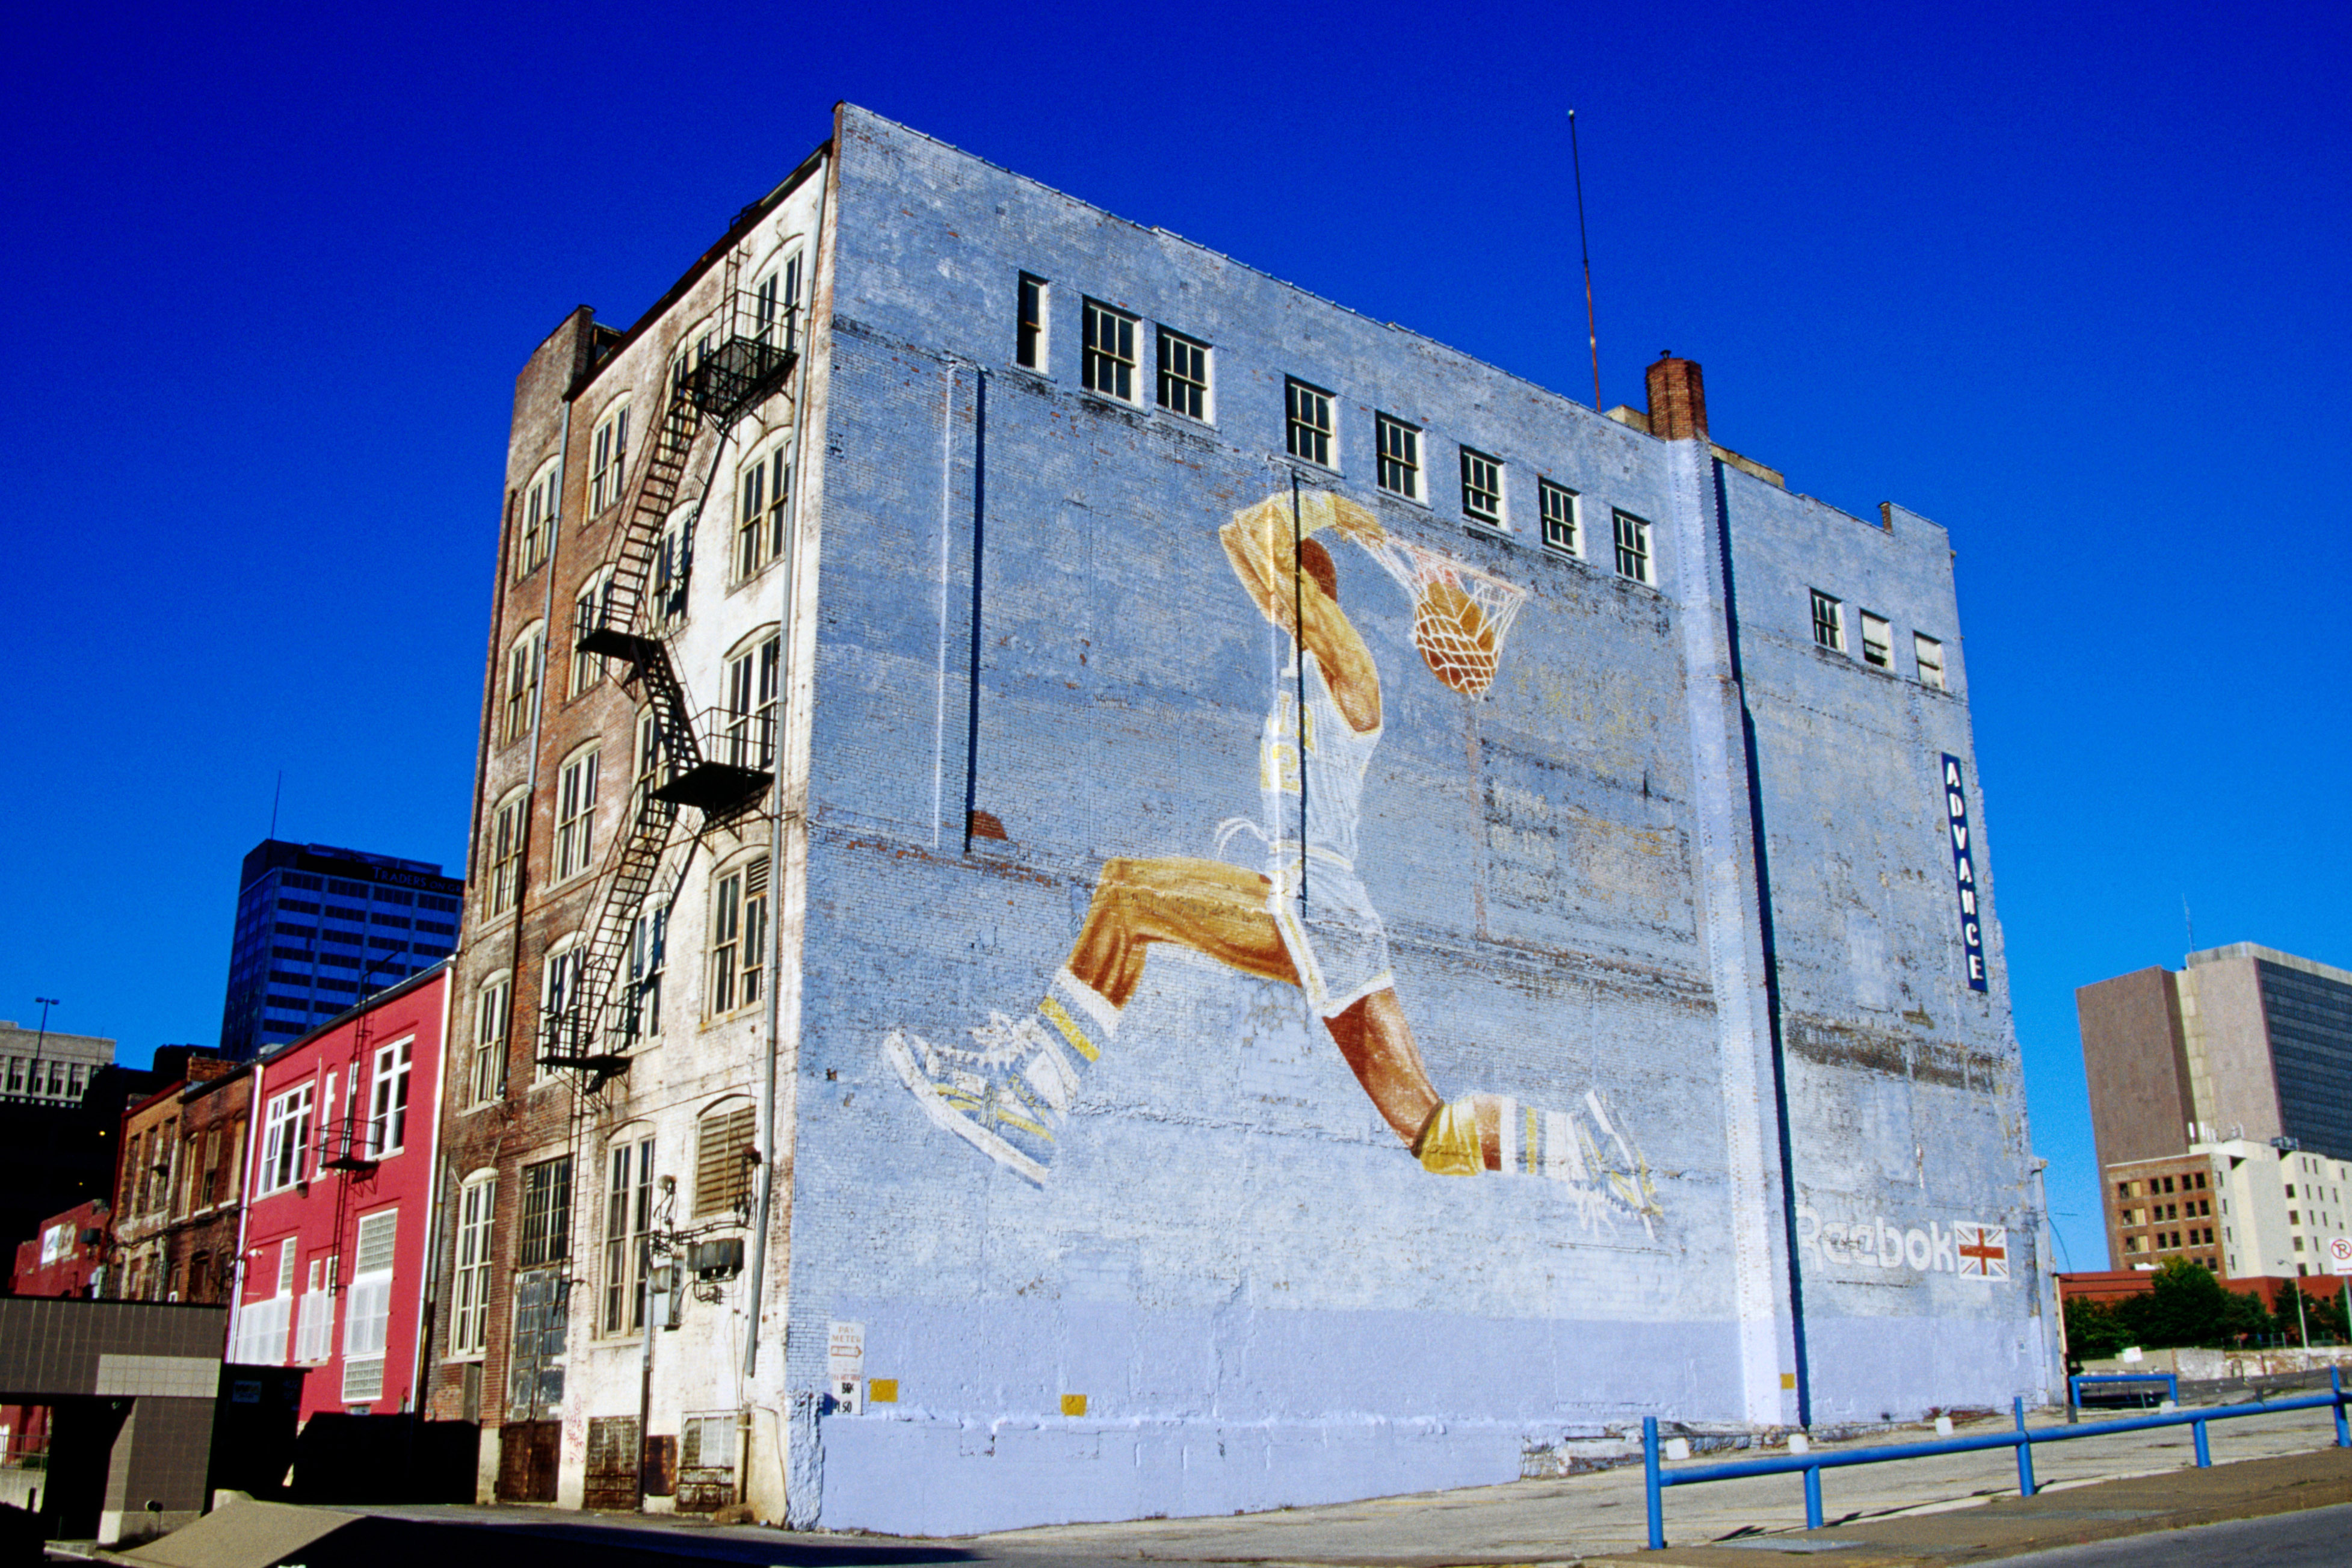 A mural decorates an abandoned building in Kansas City. Image by Richard Cummins / Lonely Planet Image / Getty